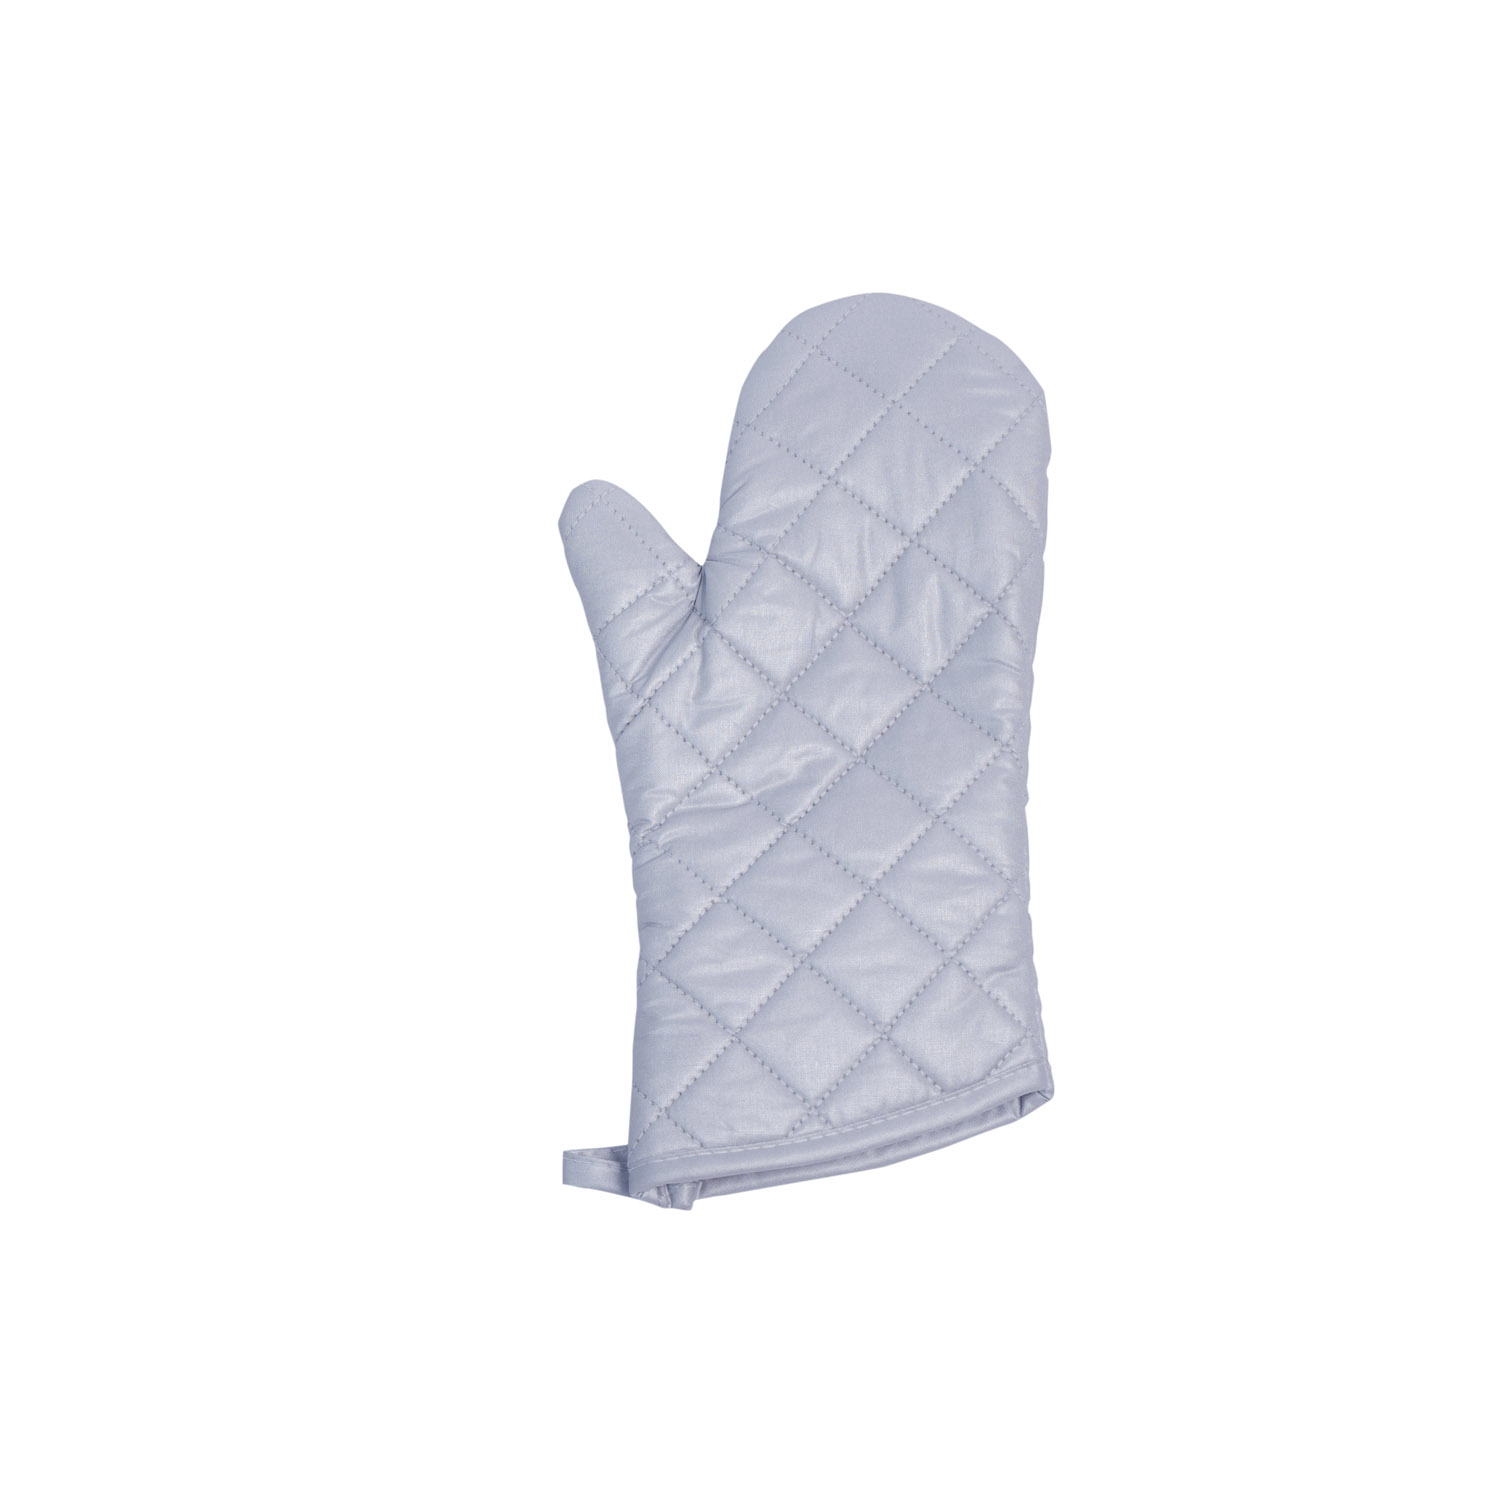 CAC China OMS1-13 Silicone-Coated Cotton Oven Mitt 13"